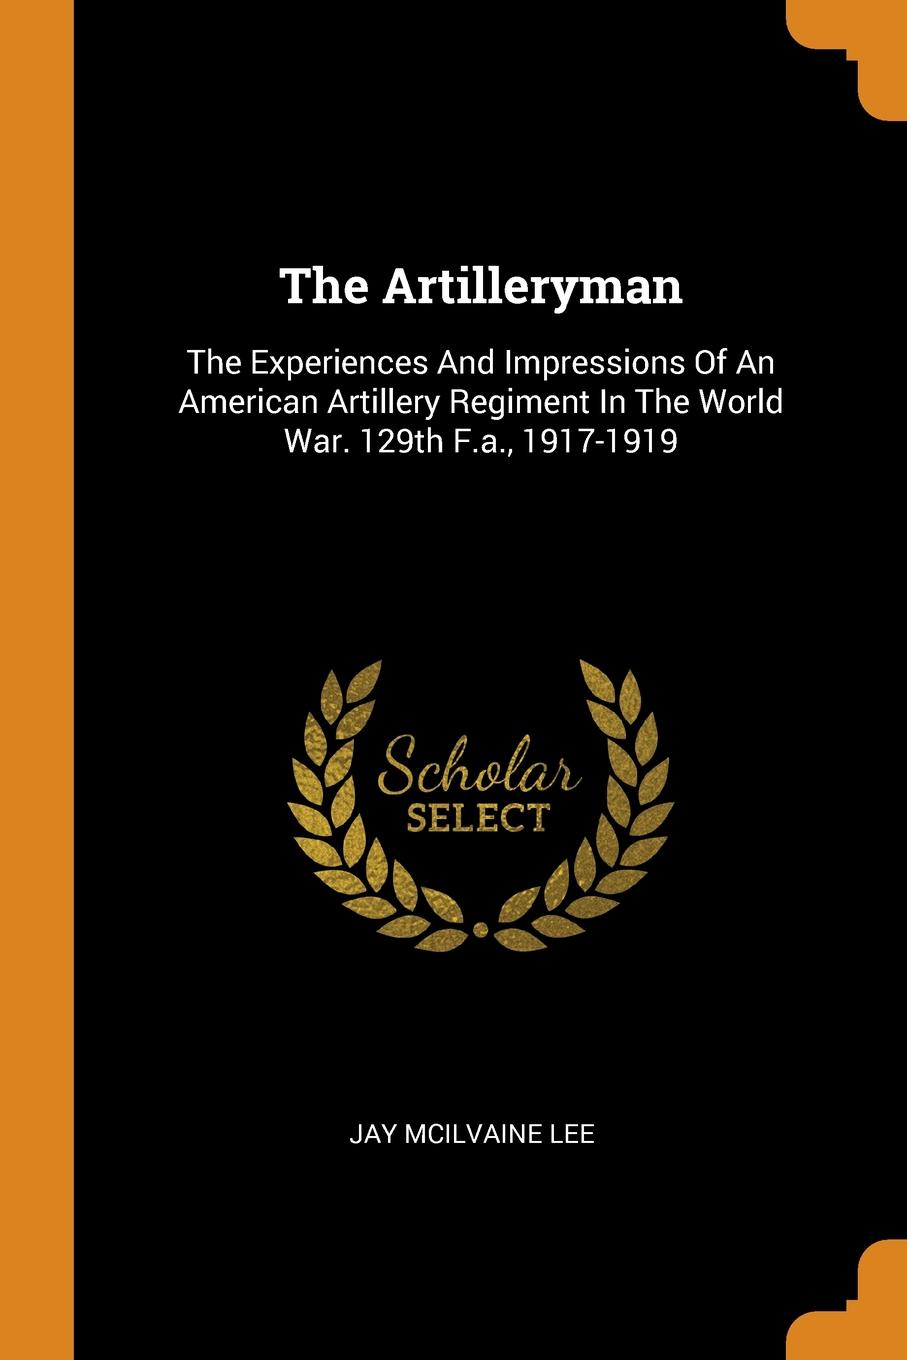 The Artilleryman. The Experiences And Impressions Of An American Artillery Regiment In The World War. 129th F.a., 1917-1919